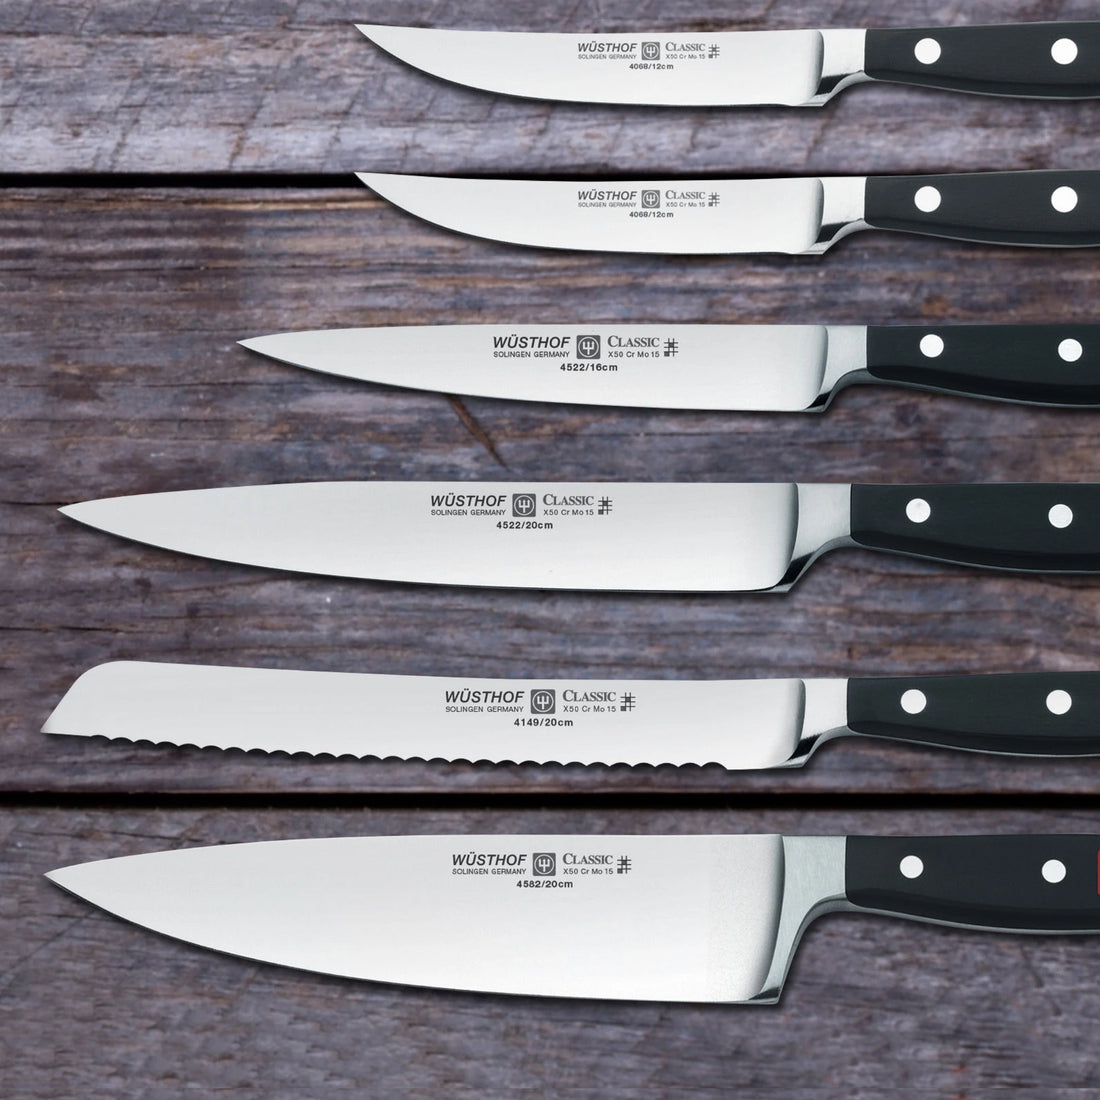 types of kitchen knives: your essential guide to choosing the best knife